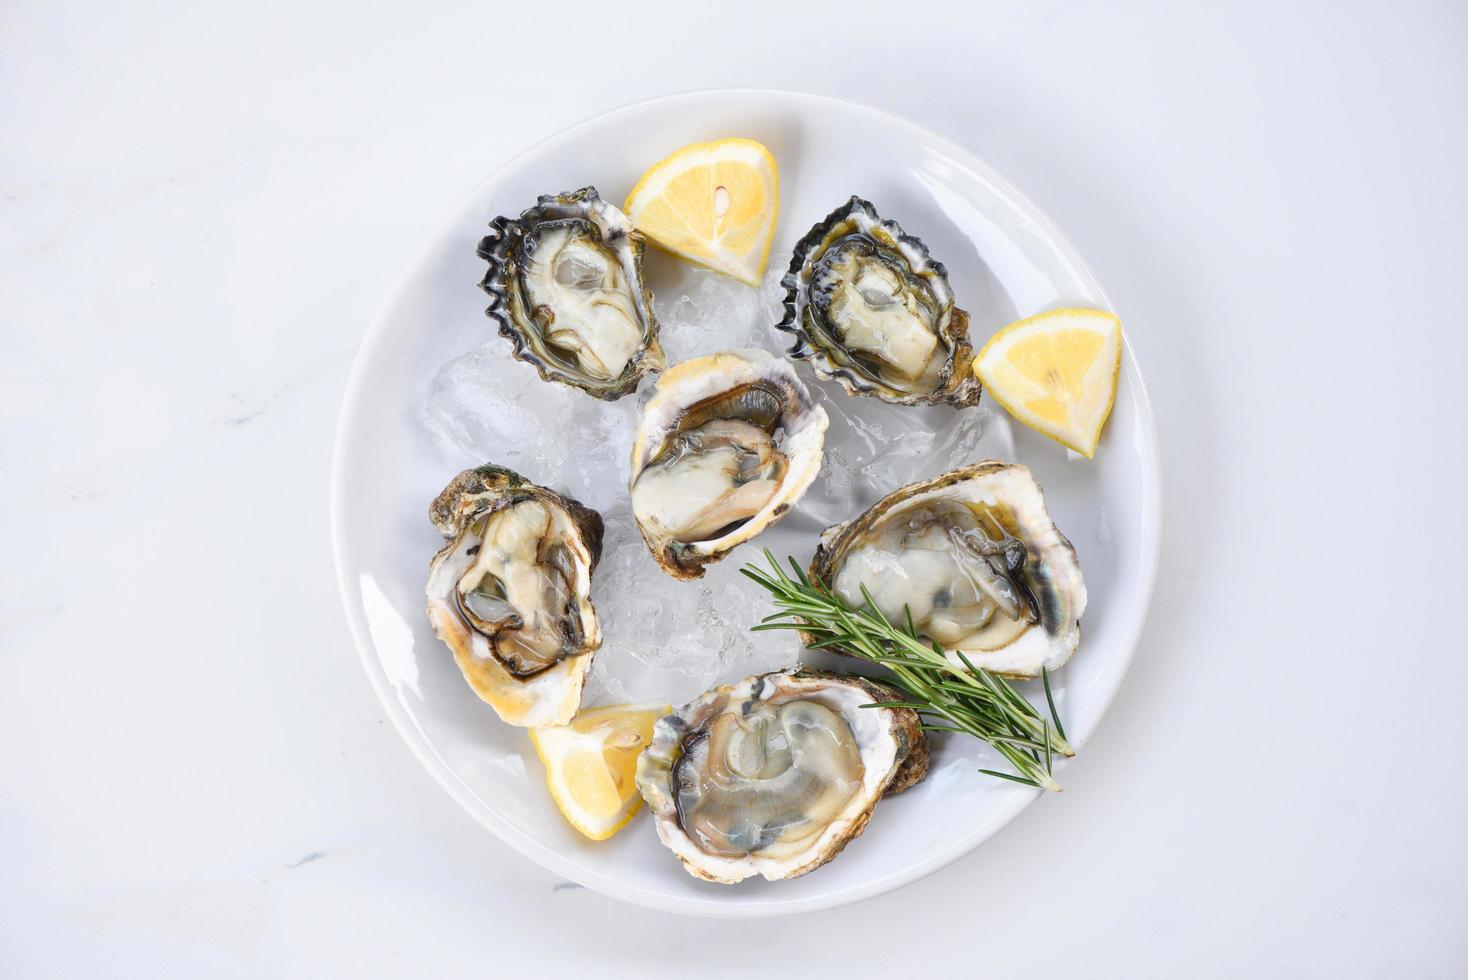 Fresh oysters seafood on white plate background - Open oyster shell with herb spices lemon rosemary served on table and ice healthy sea food raw oyster dinner in the restaurant gourmet food photo